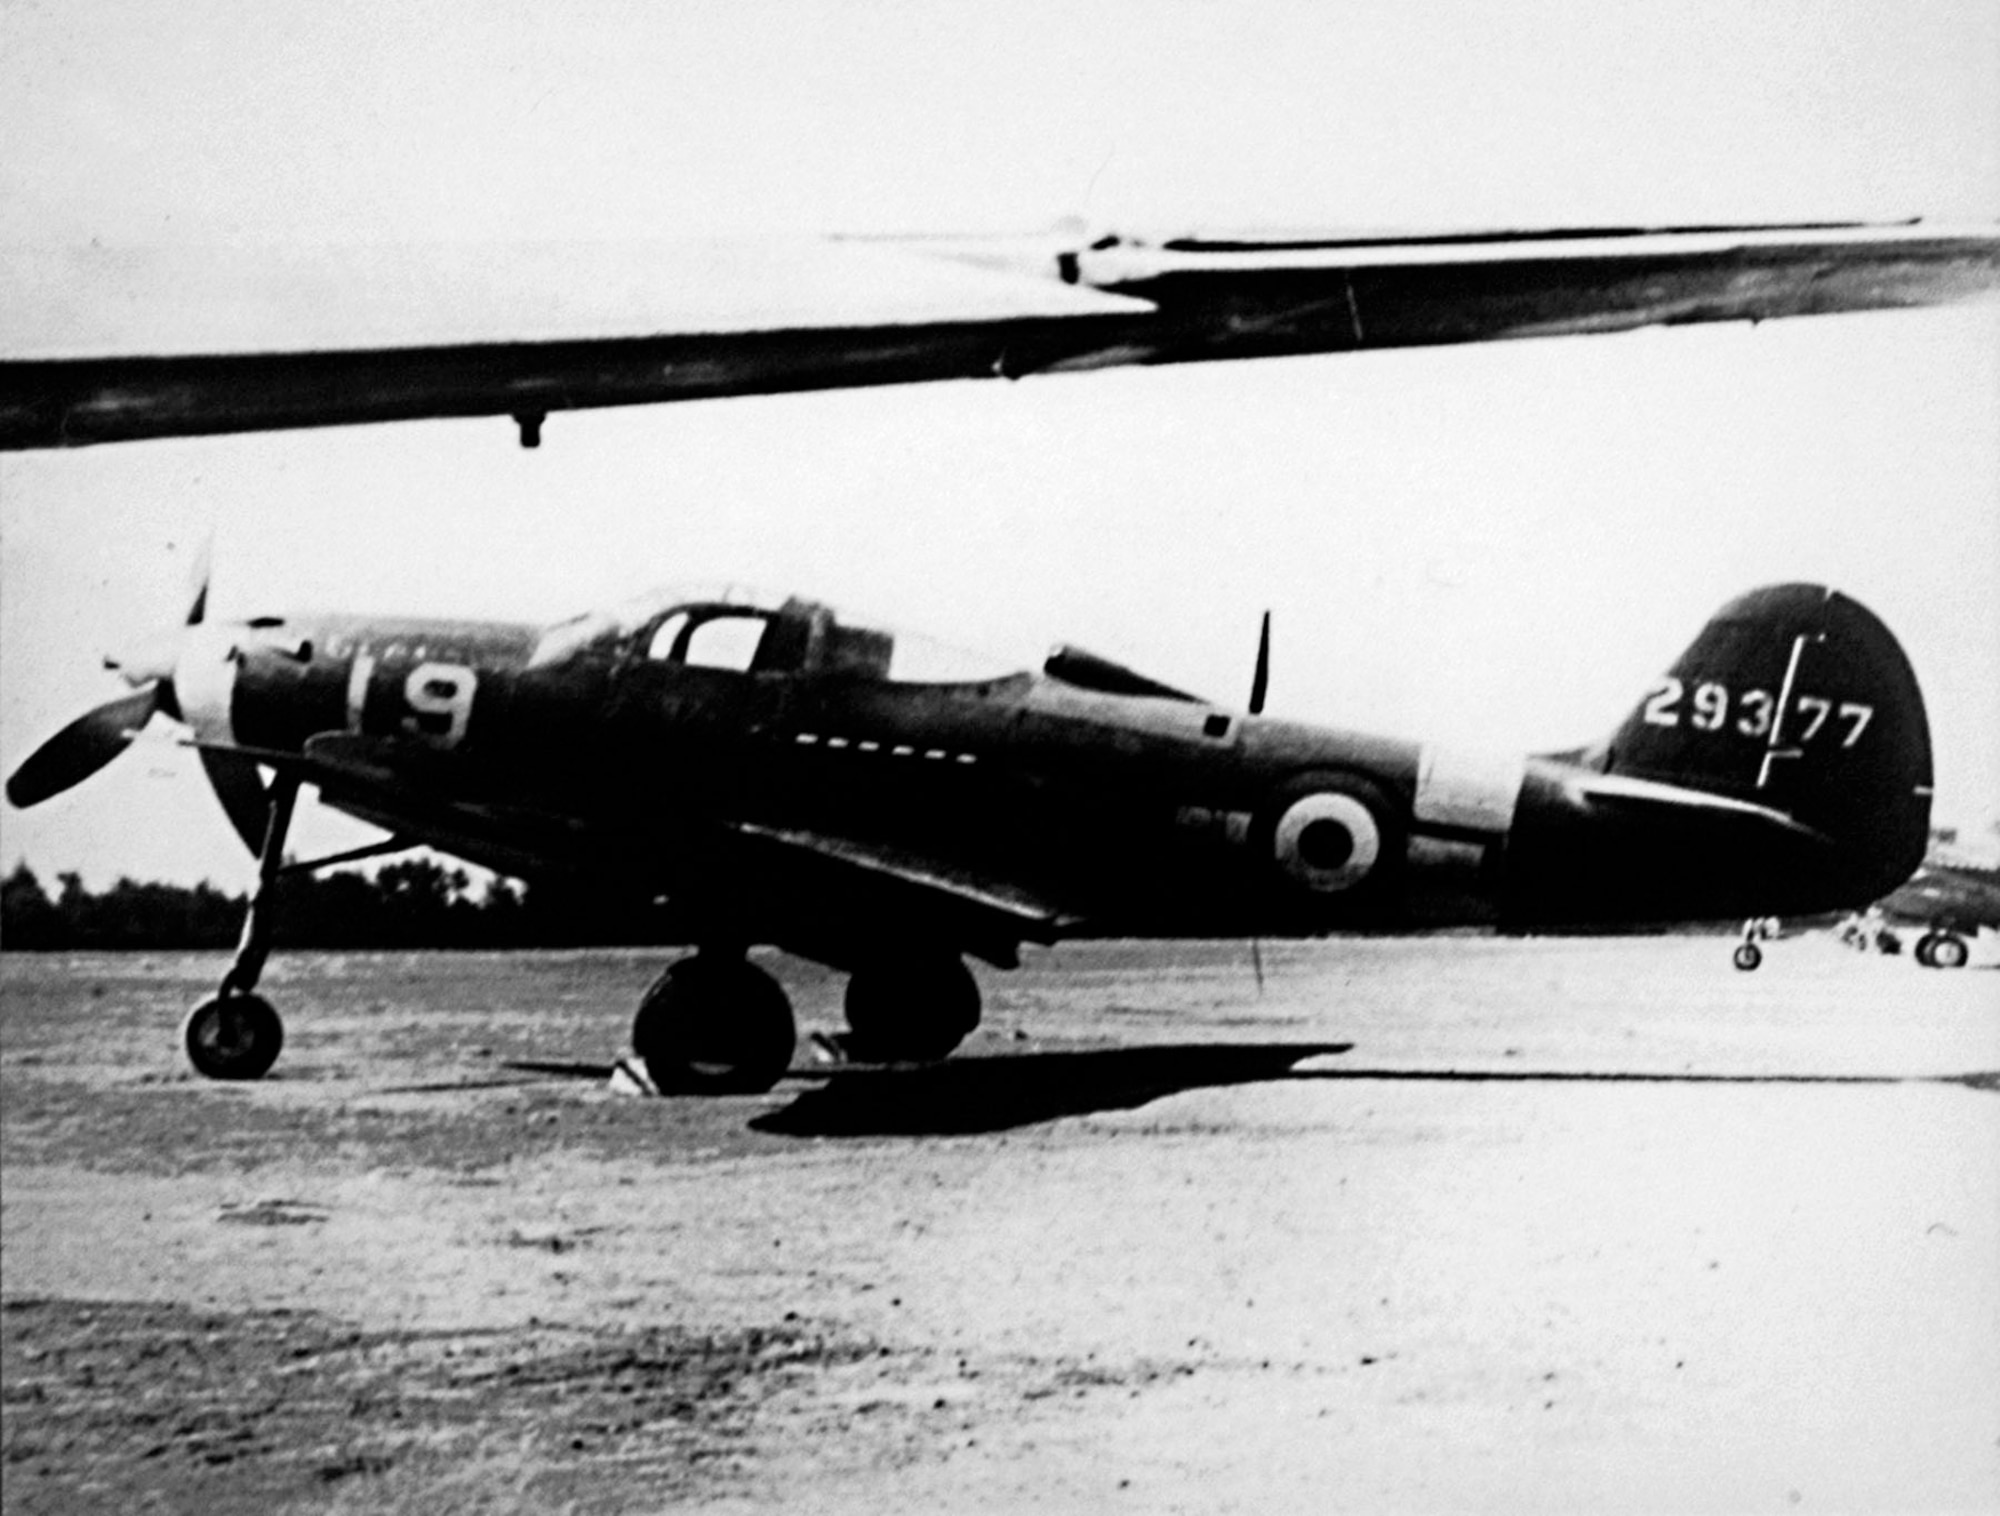 The USAAF supplied P-39Ns to the Regia Aeronautica’s 4th Stormo in the summer of 1944. Note the Italian insignia painted over the USAAF insignia on the fuselage. (U.S. Air Force photo)